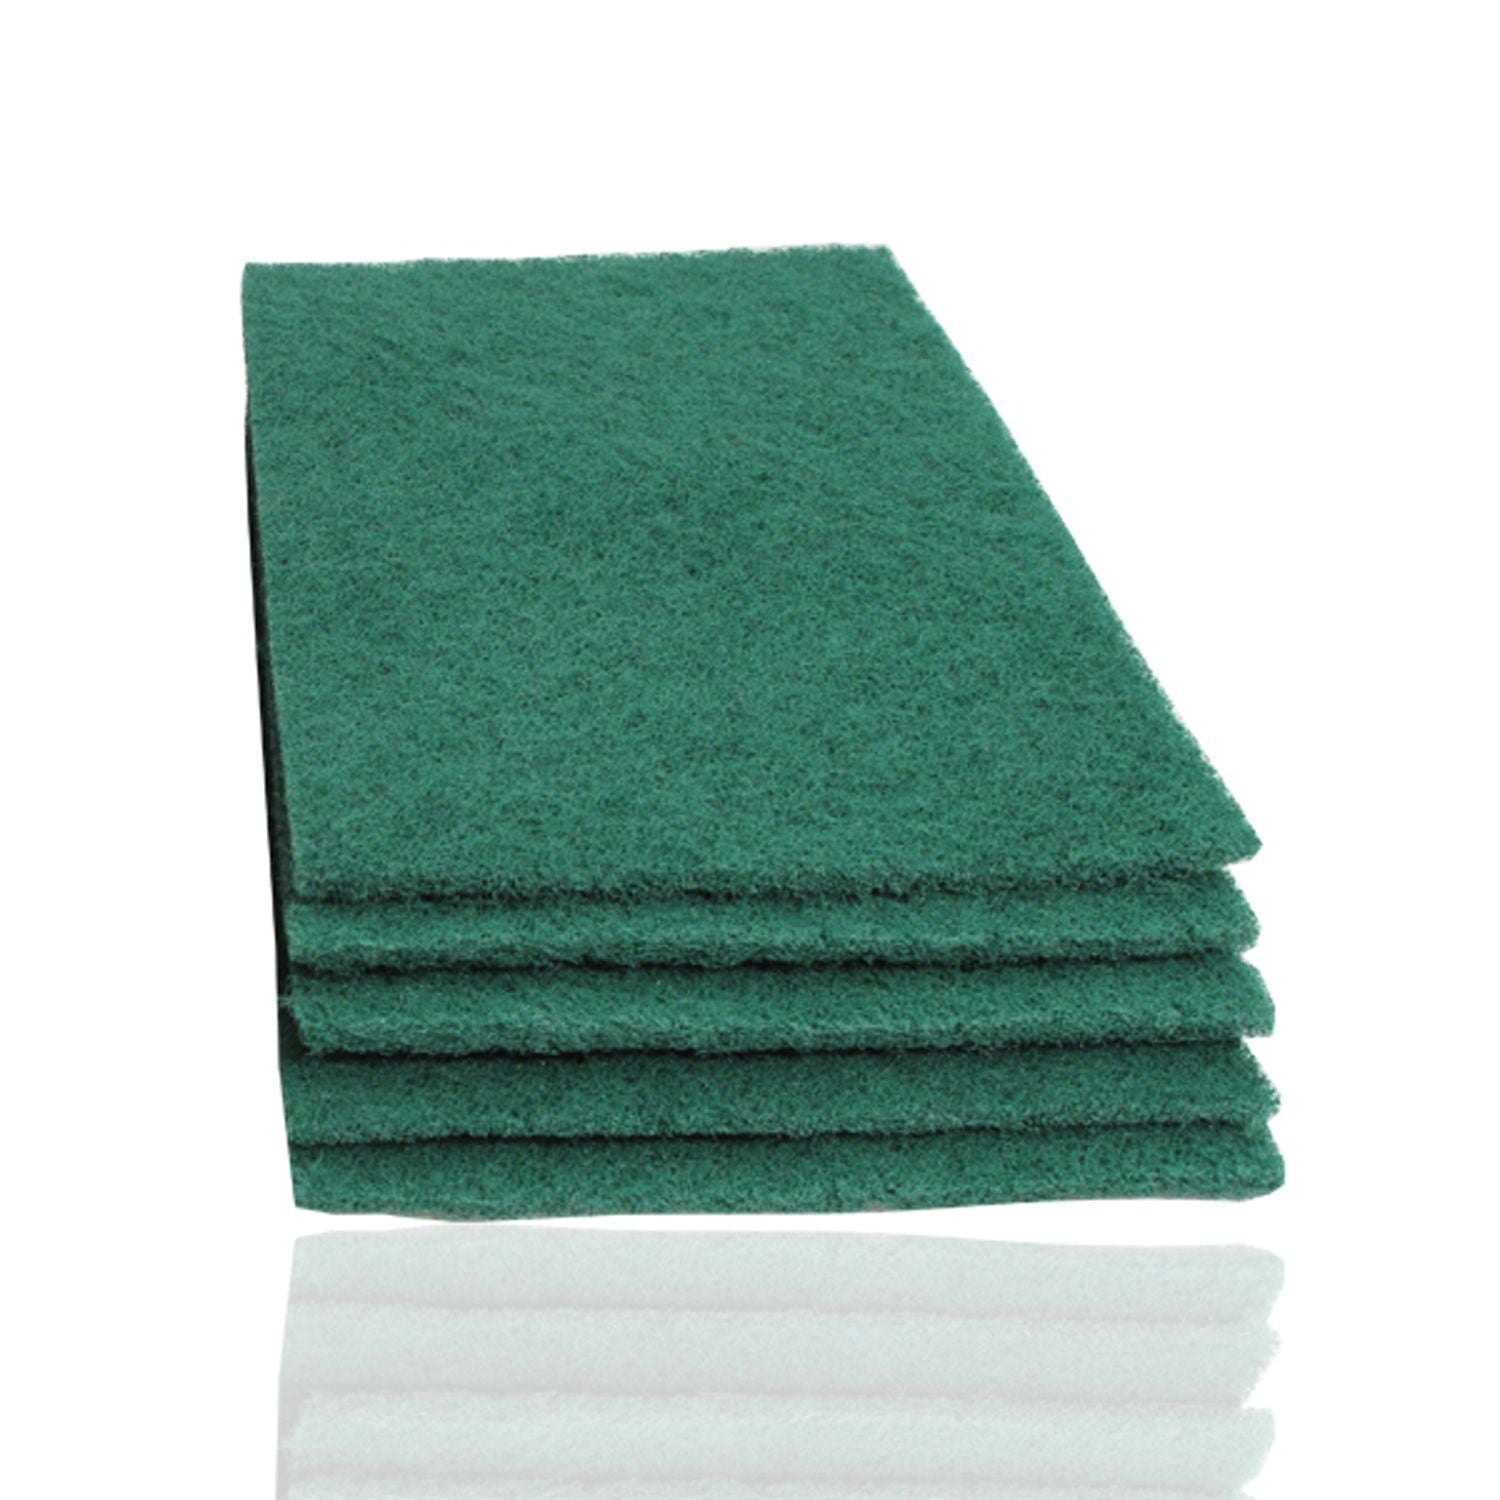 Economy Green Pads | 23 x 15cm | Pack of 10